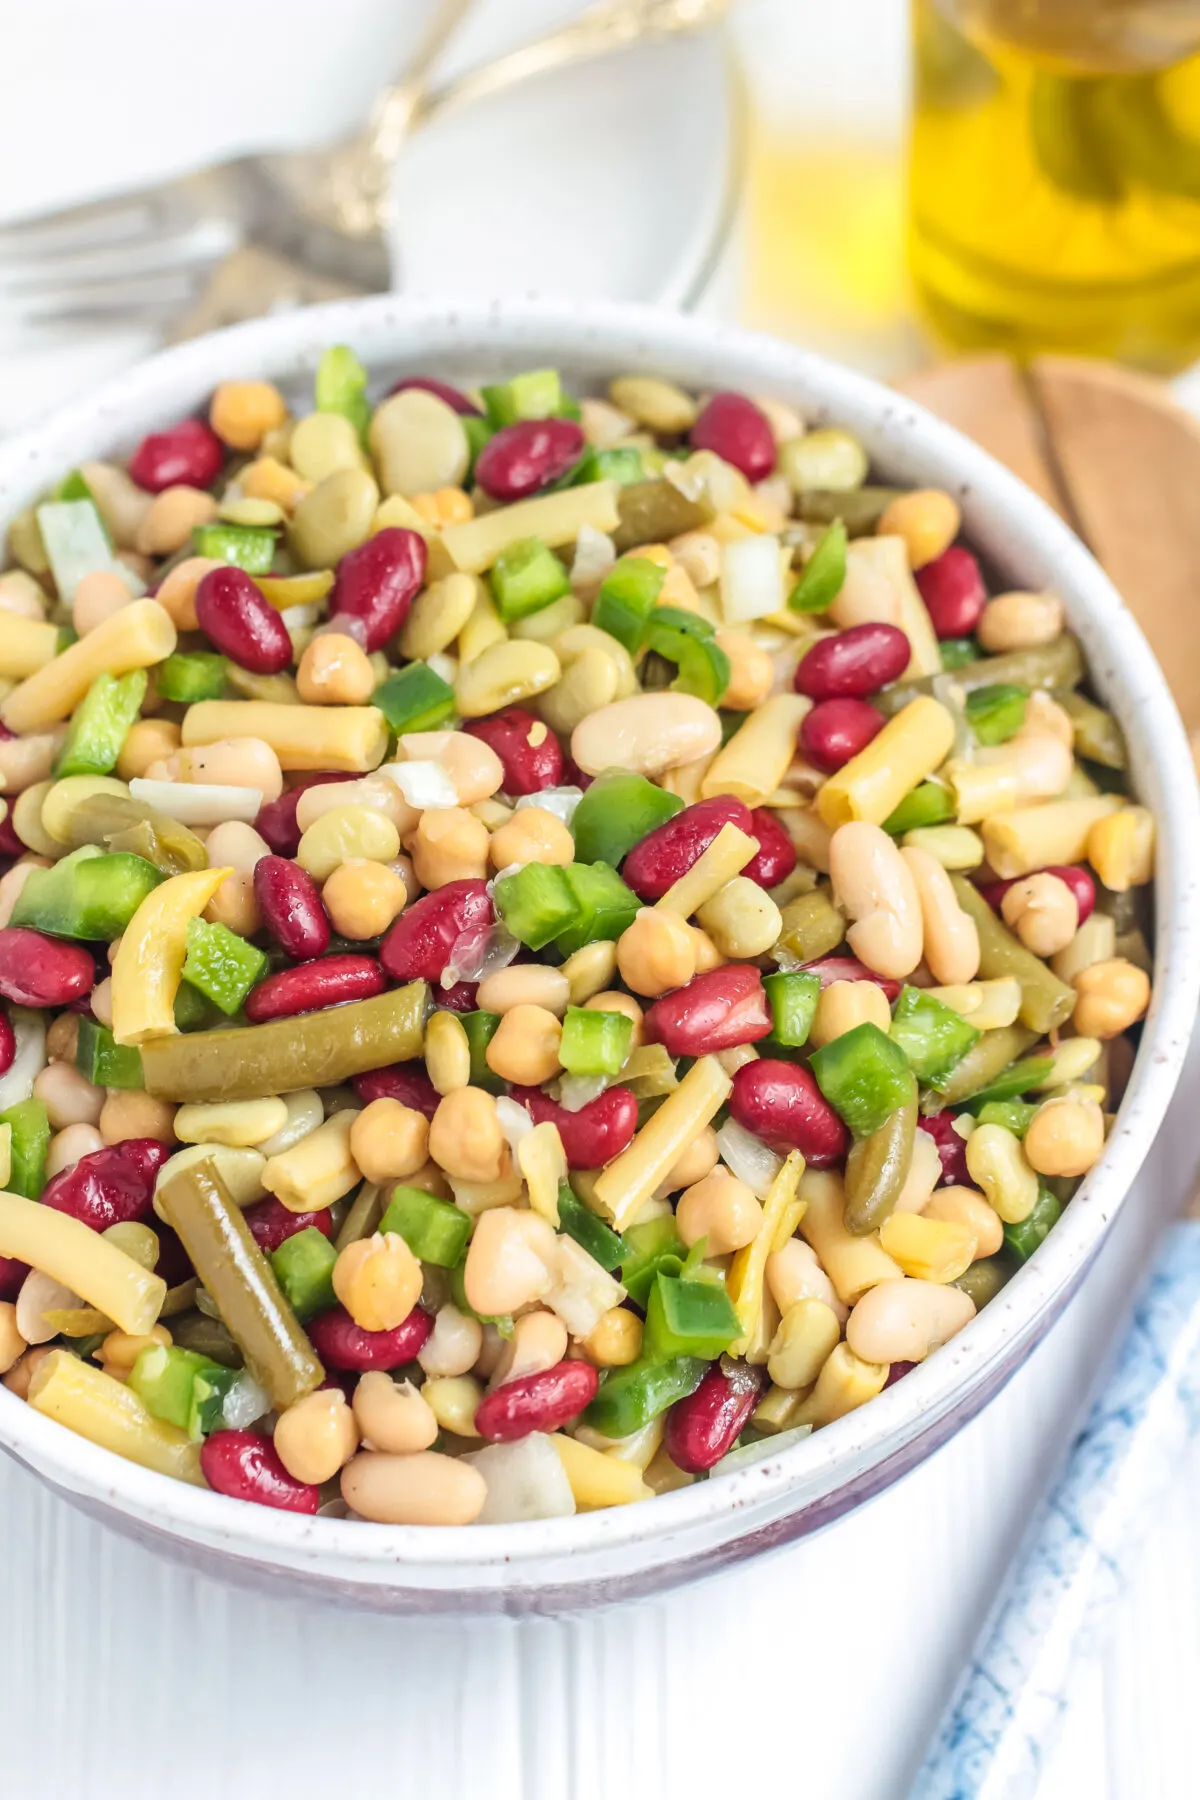 This is the BEST 5 bean salad recipe for potlucks, BBQs, and picnics! It's quick, easy, and affordable - a perfect salad for any budget.